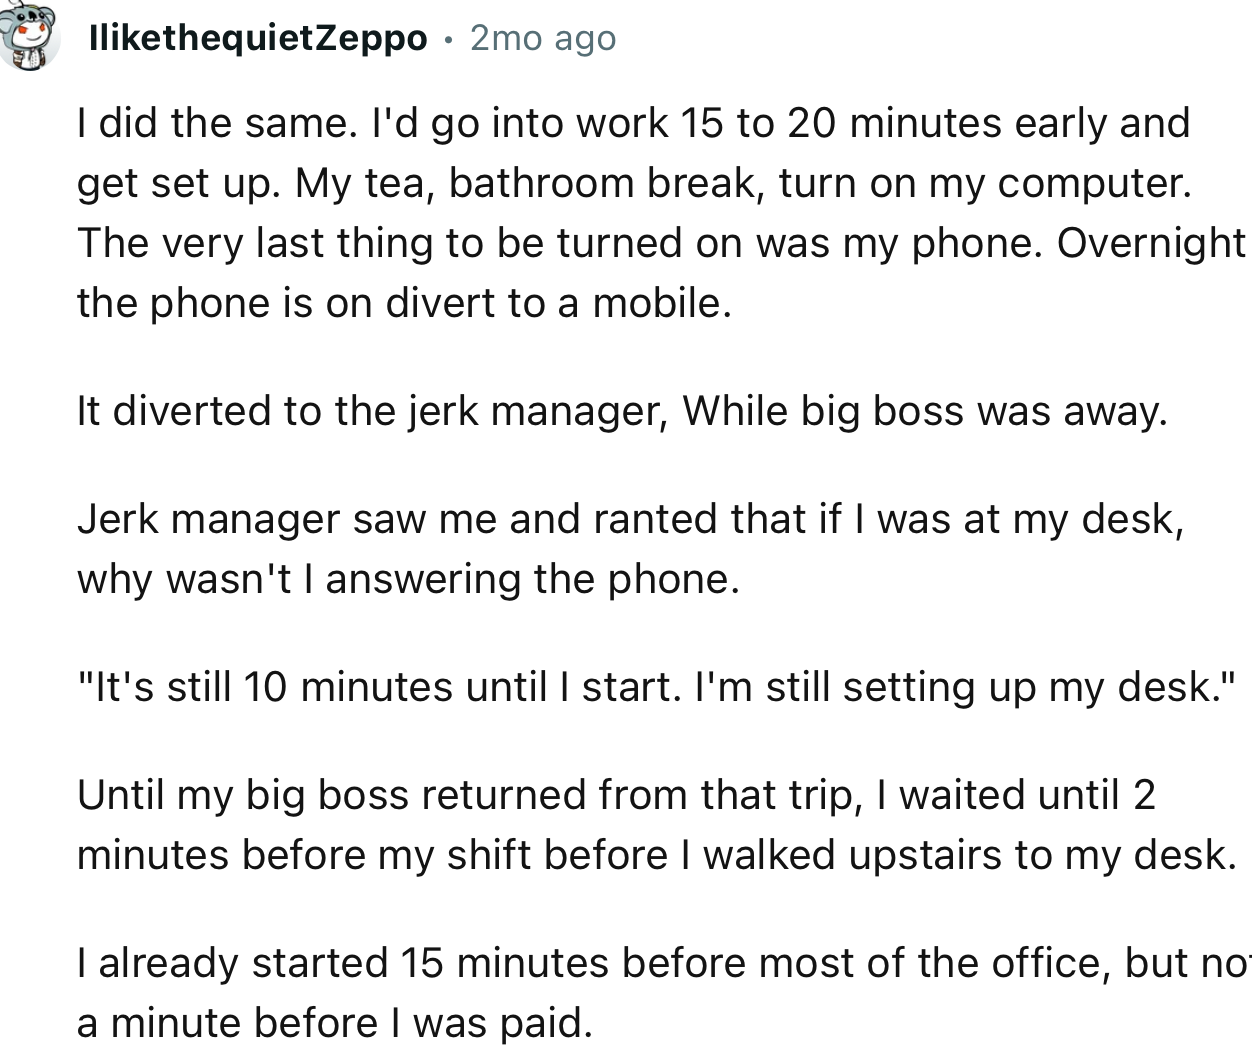 Workplace Rebel Stages Resistance Against Overbearing Boss, Sparking ...